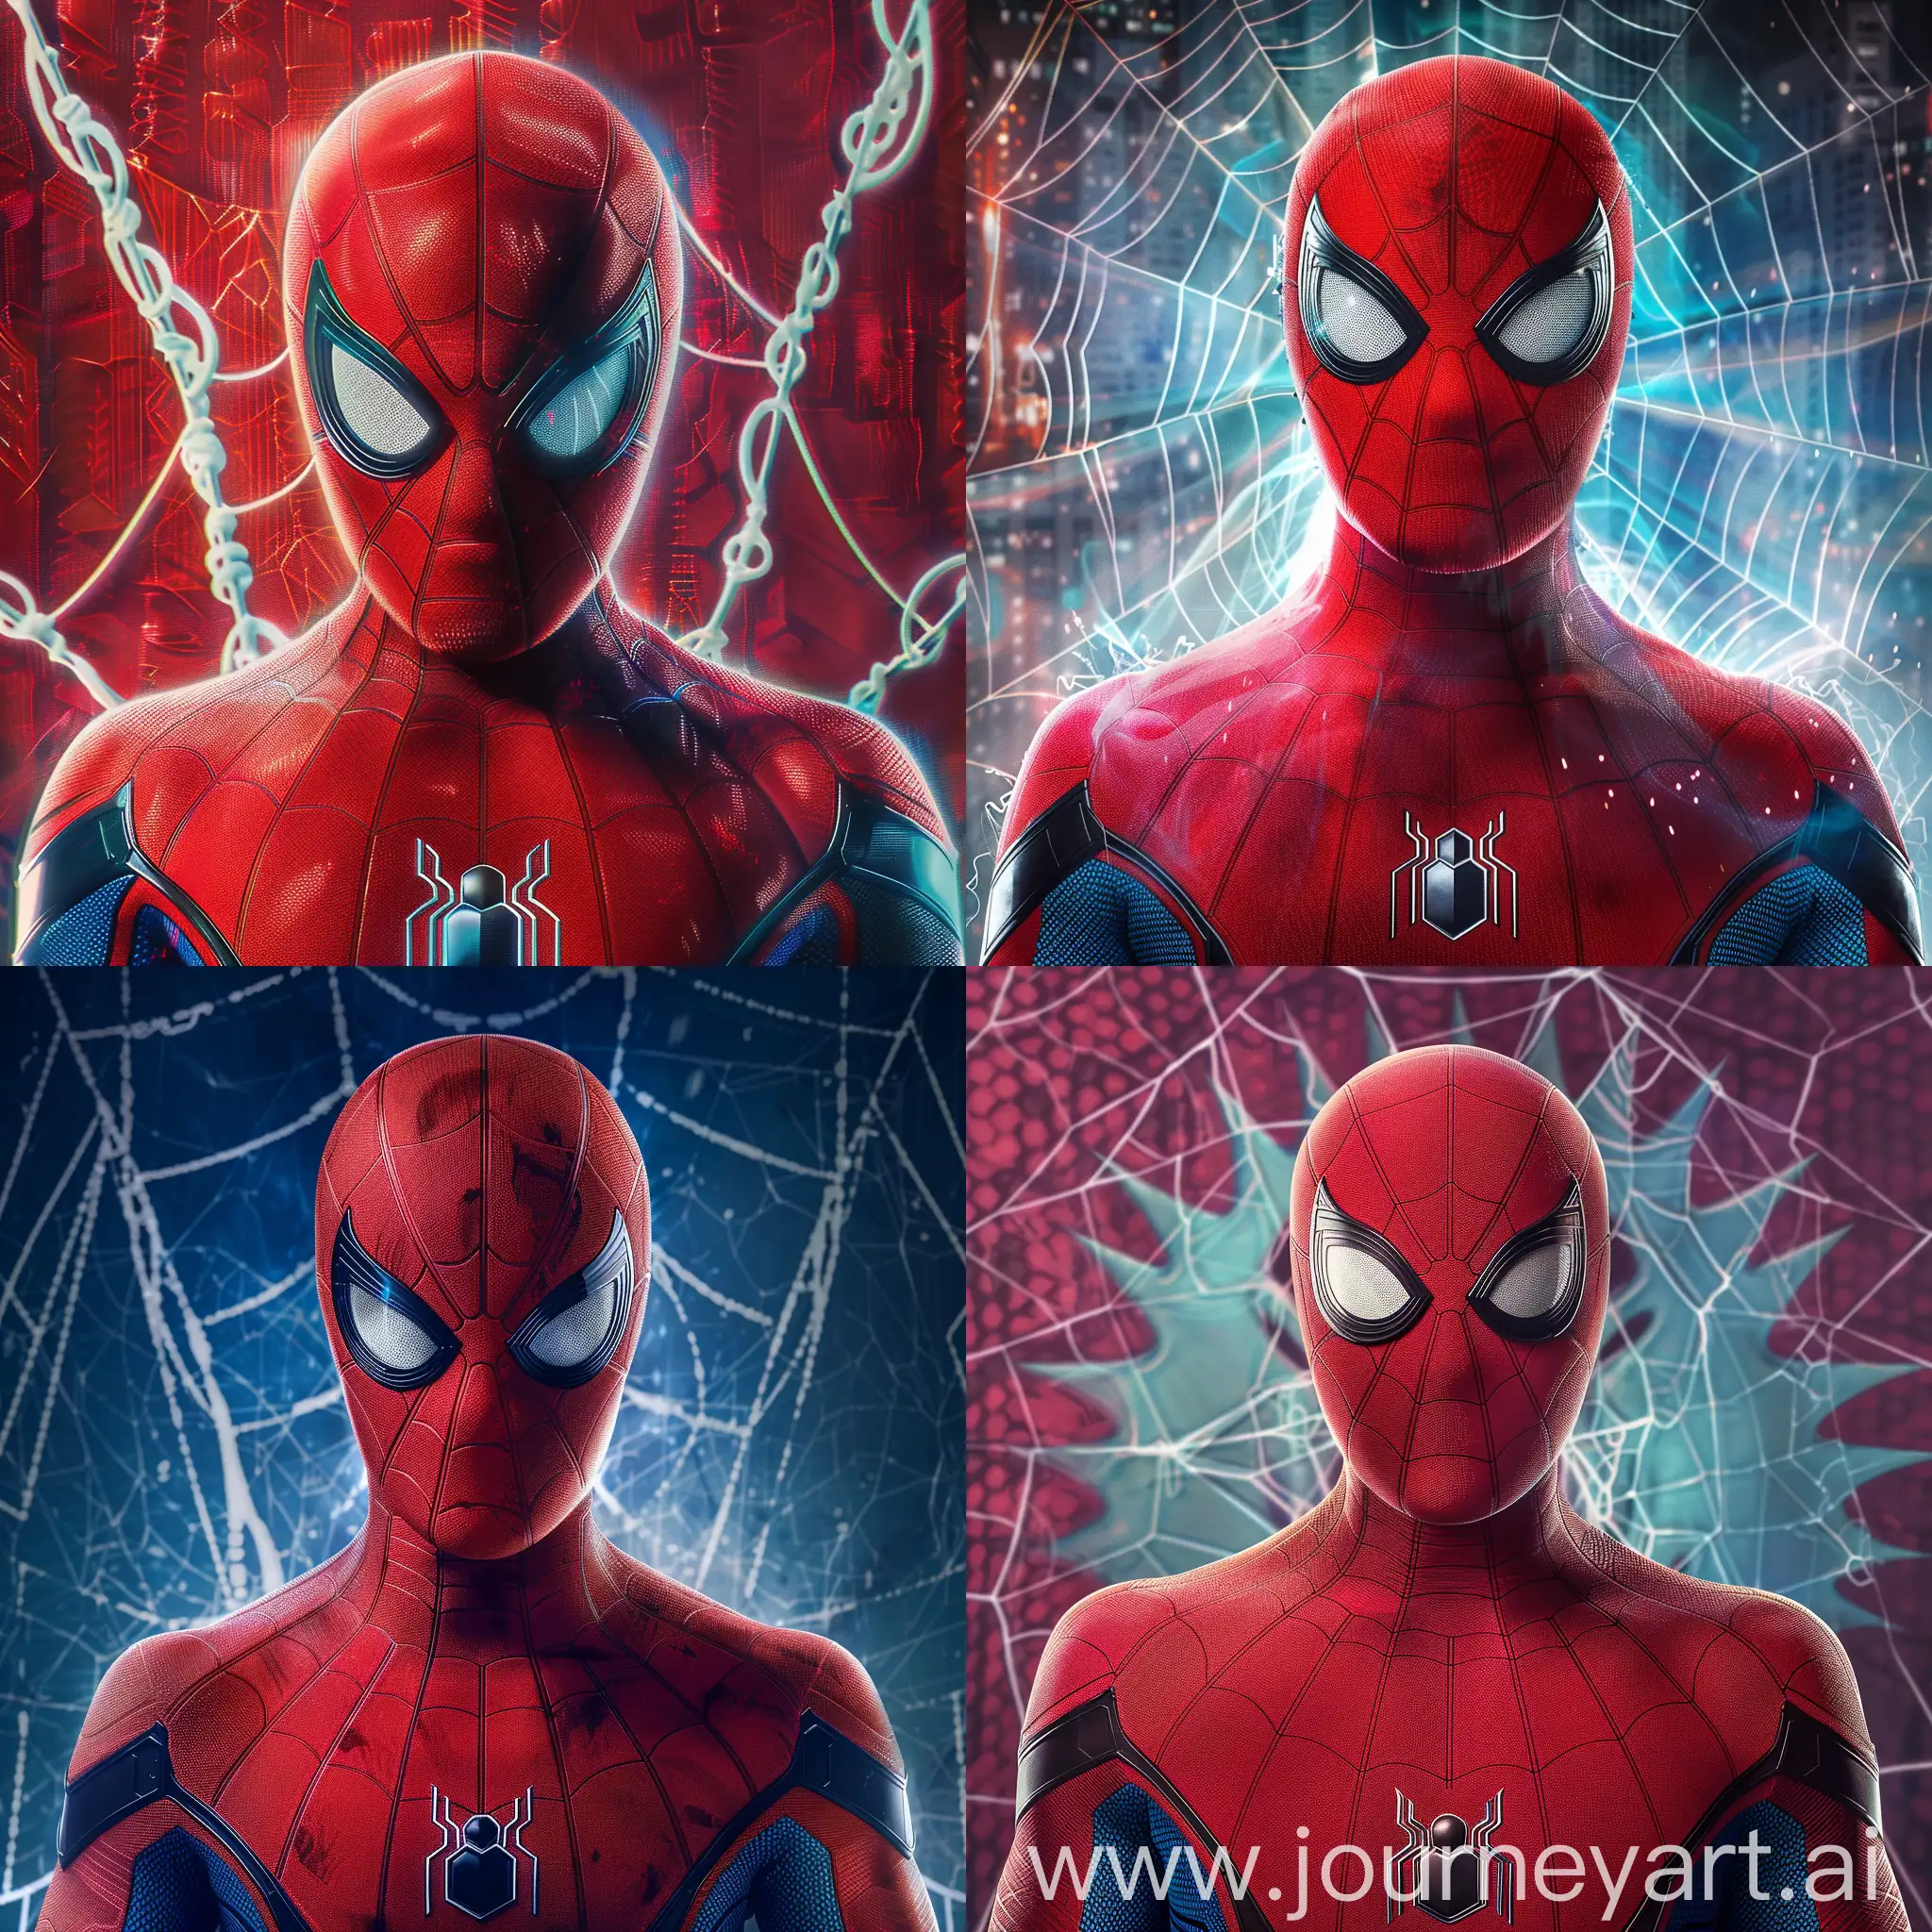 Cinematic-SpiderMan-Poster-Advanced-Red-and-Blue-Suit-with-MCU-Mask